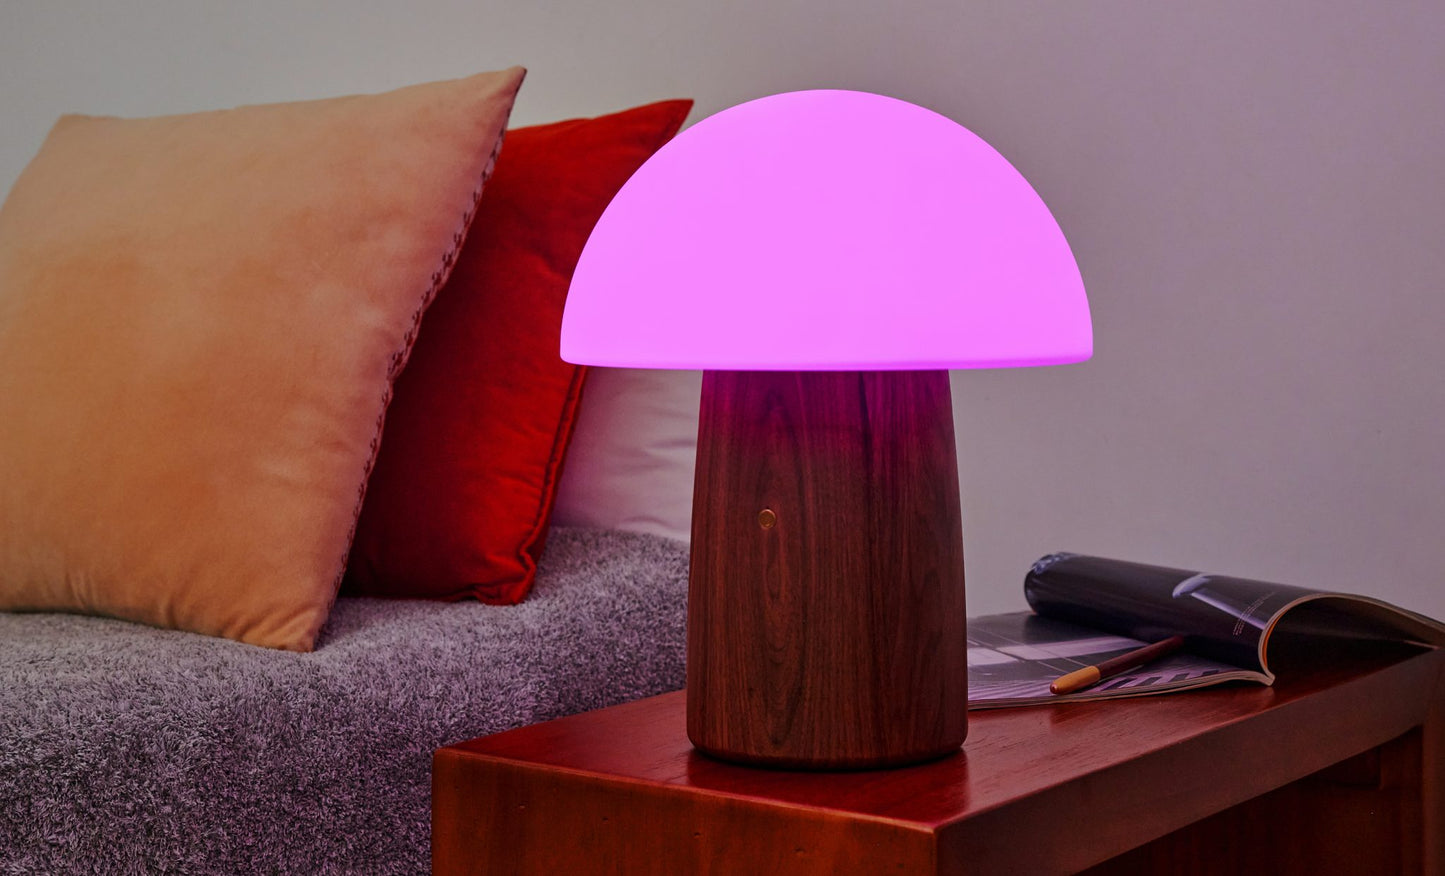 Alice Mushroom Lamp for end table or nightstand